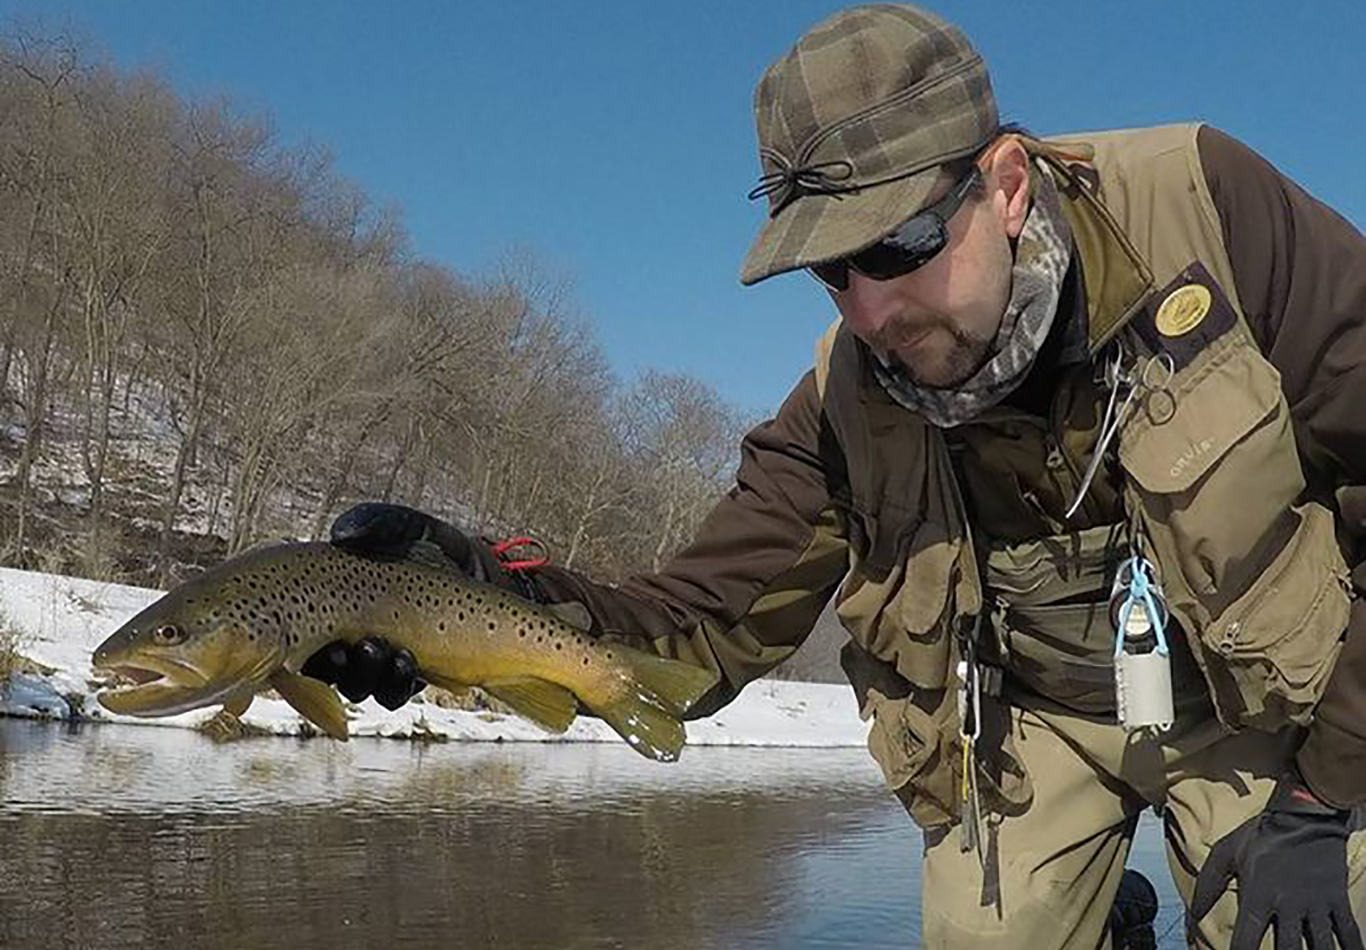 Well-Known Fly Fishing Guides Perish Tragically in Fishing Accident